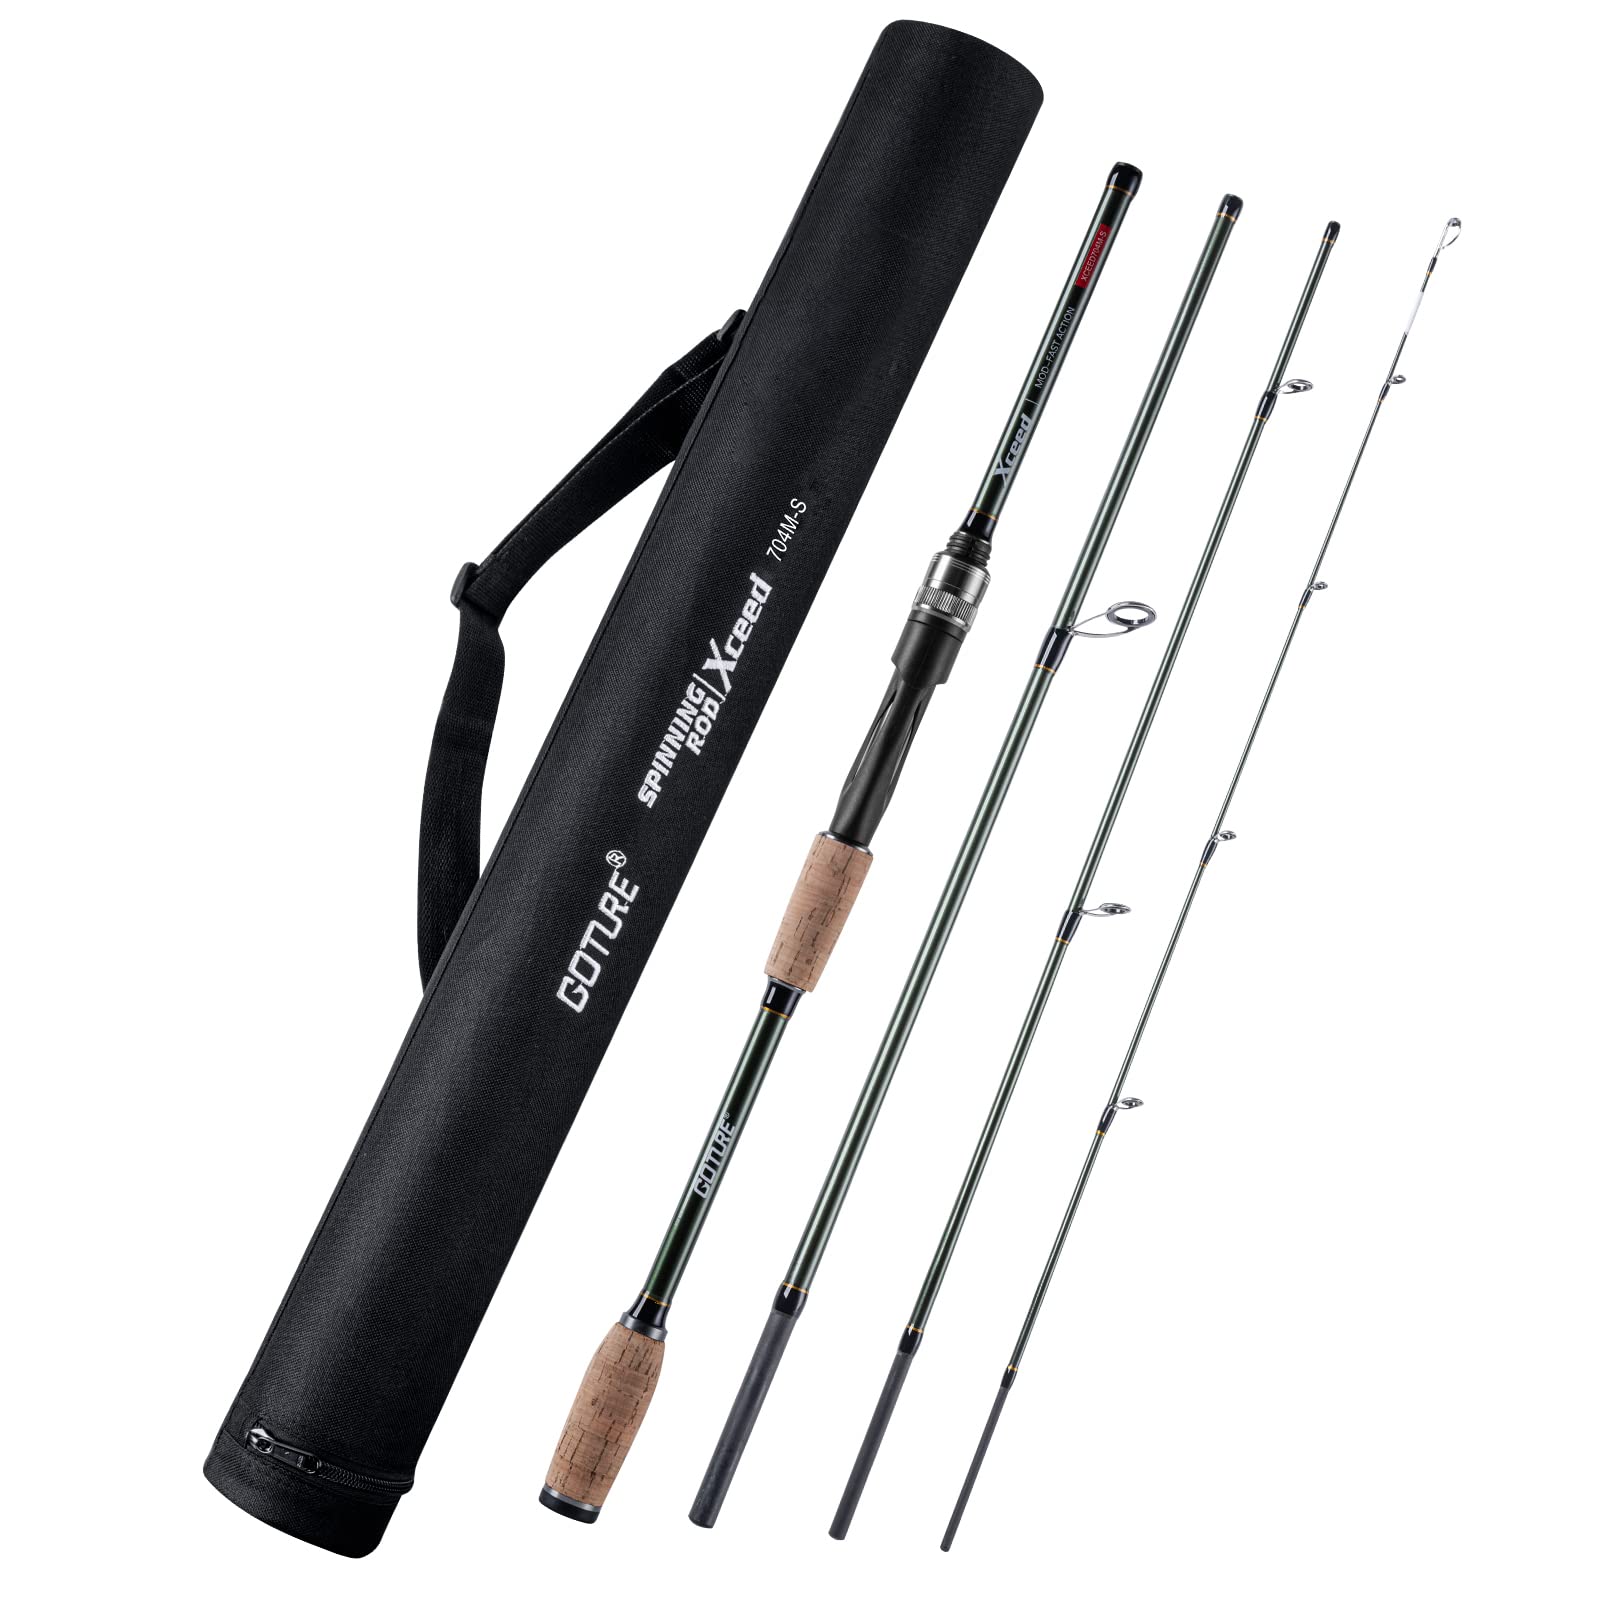 🐟 REVIEW: Goture Xceed 4-piece Fishing Rod. Real Live Action